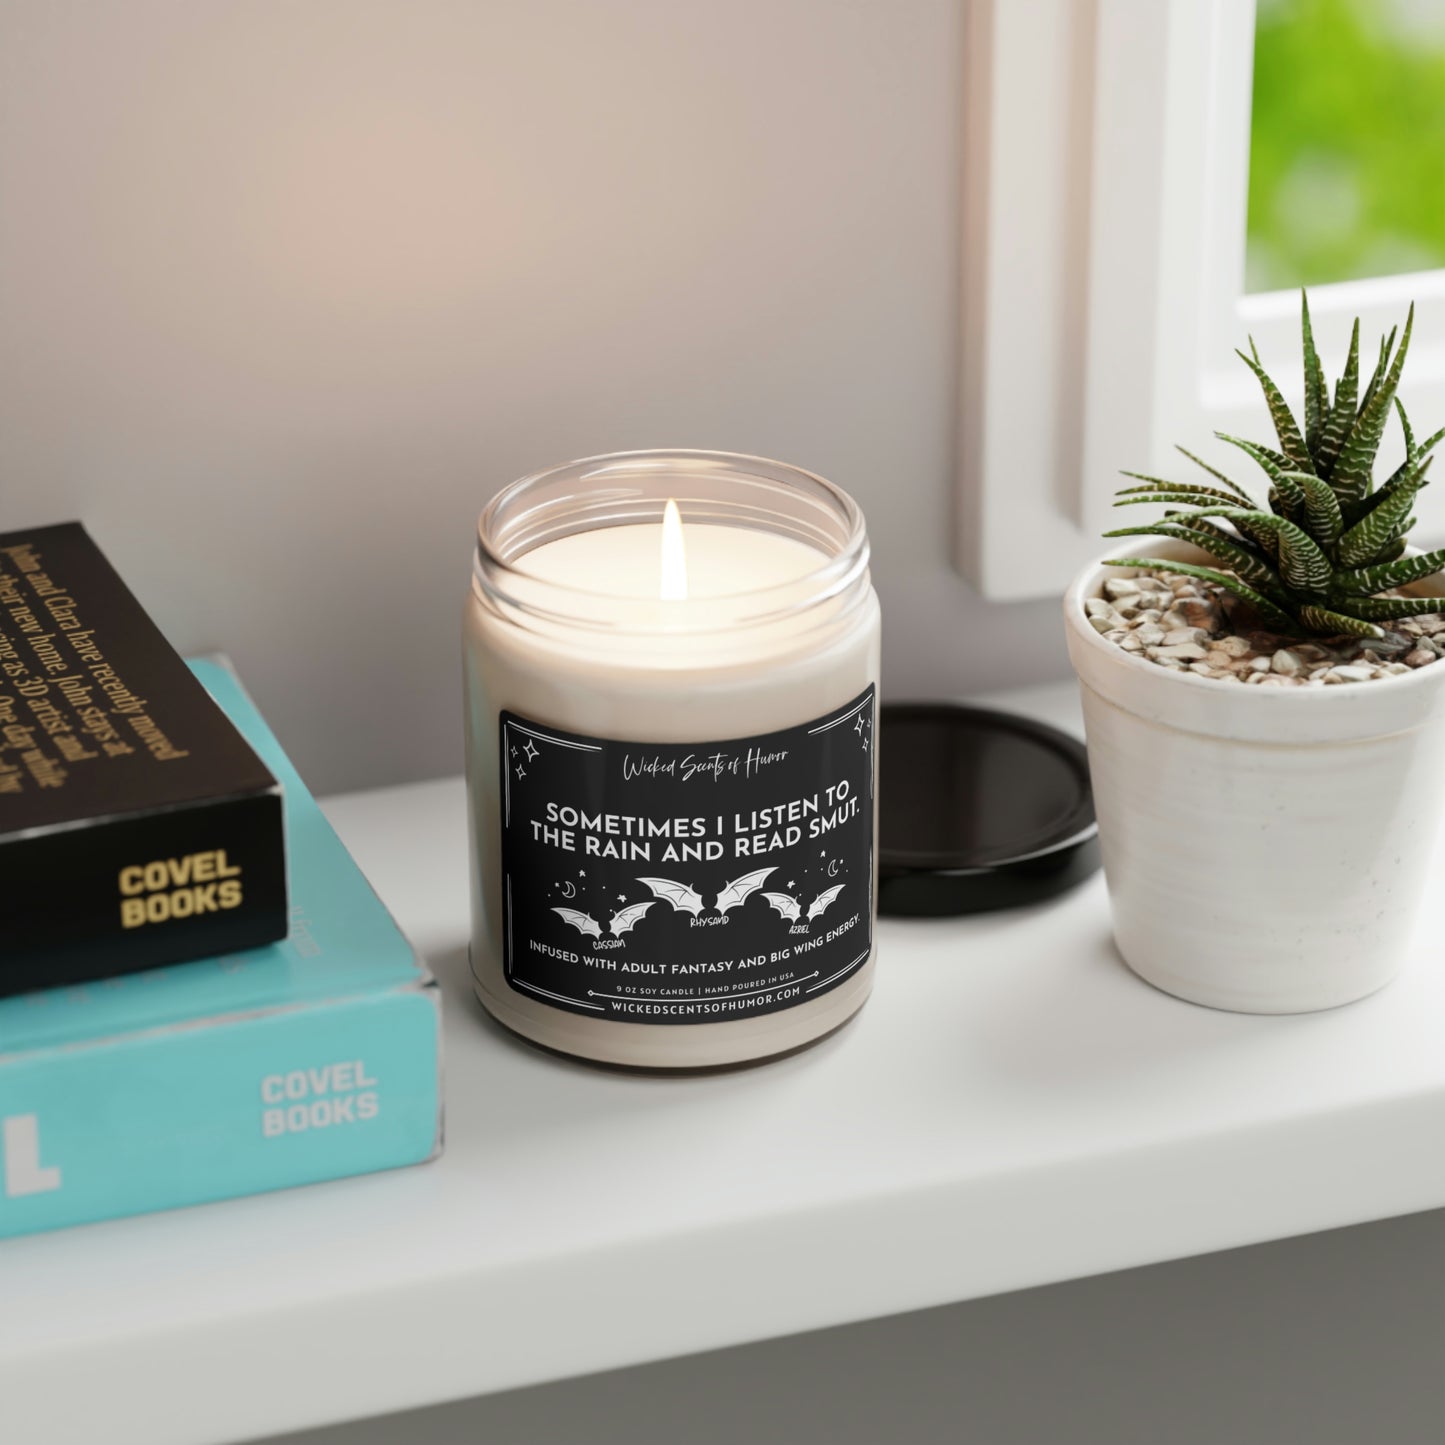 Smut and Rain Candle, Acotar Merch, A court of Thorns and Roses, Velaris Candle, ACOMAF, Book Lover Candle, 9oz Soy Candle